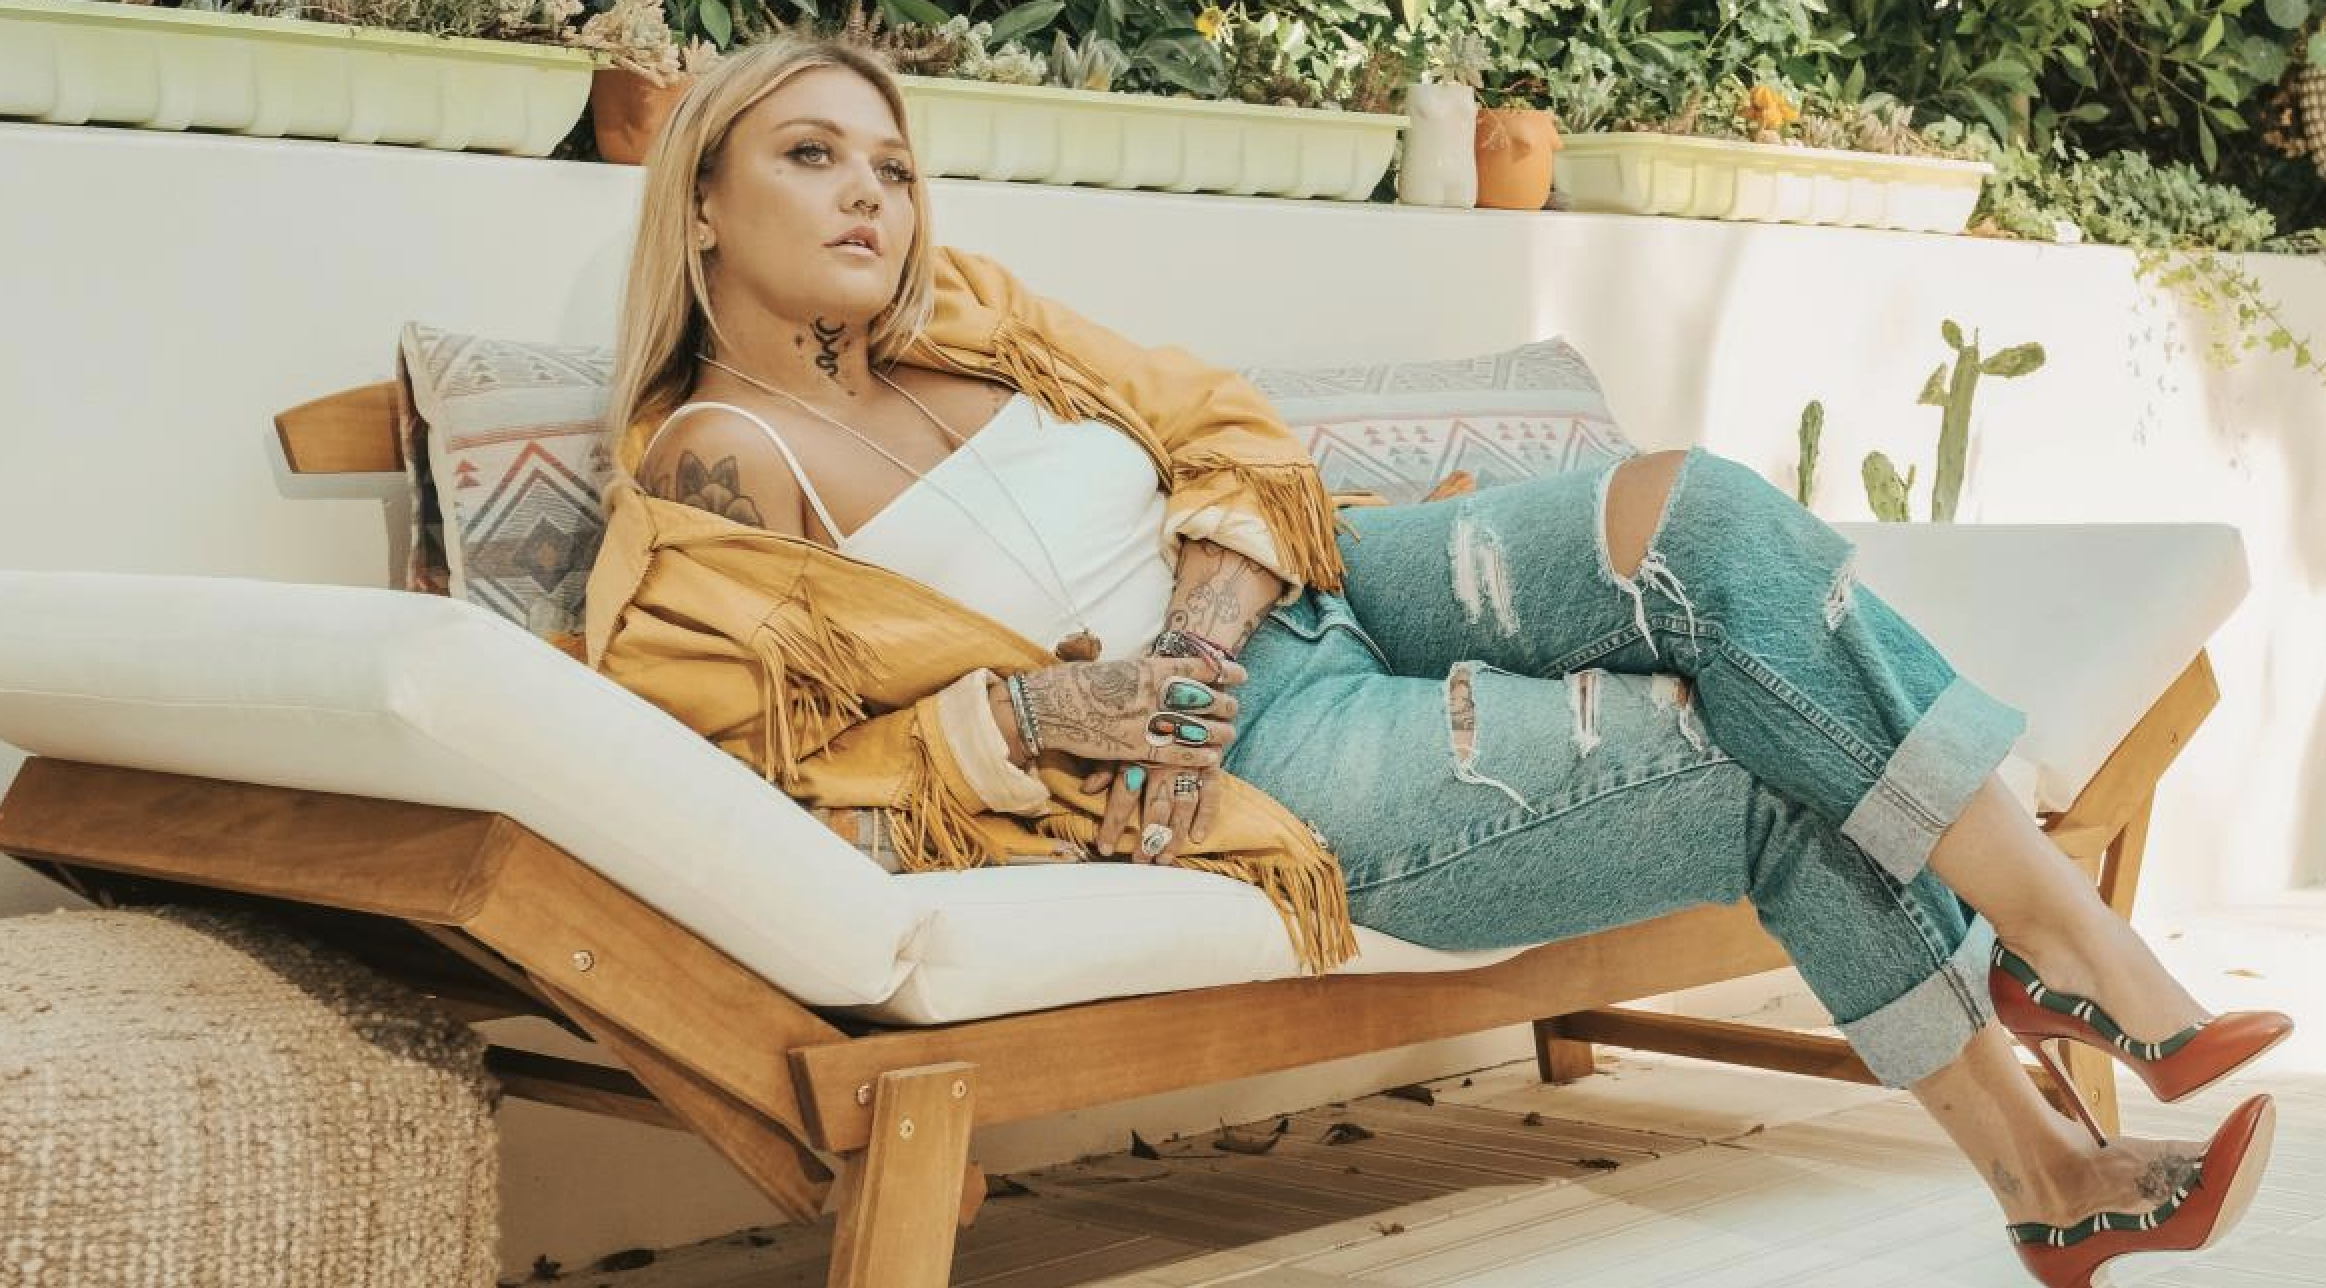 Elle King on a couch.